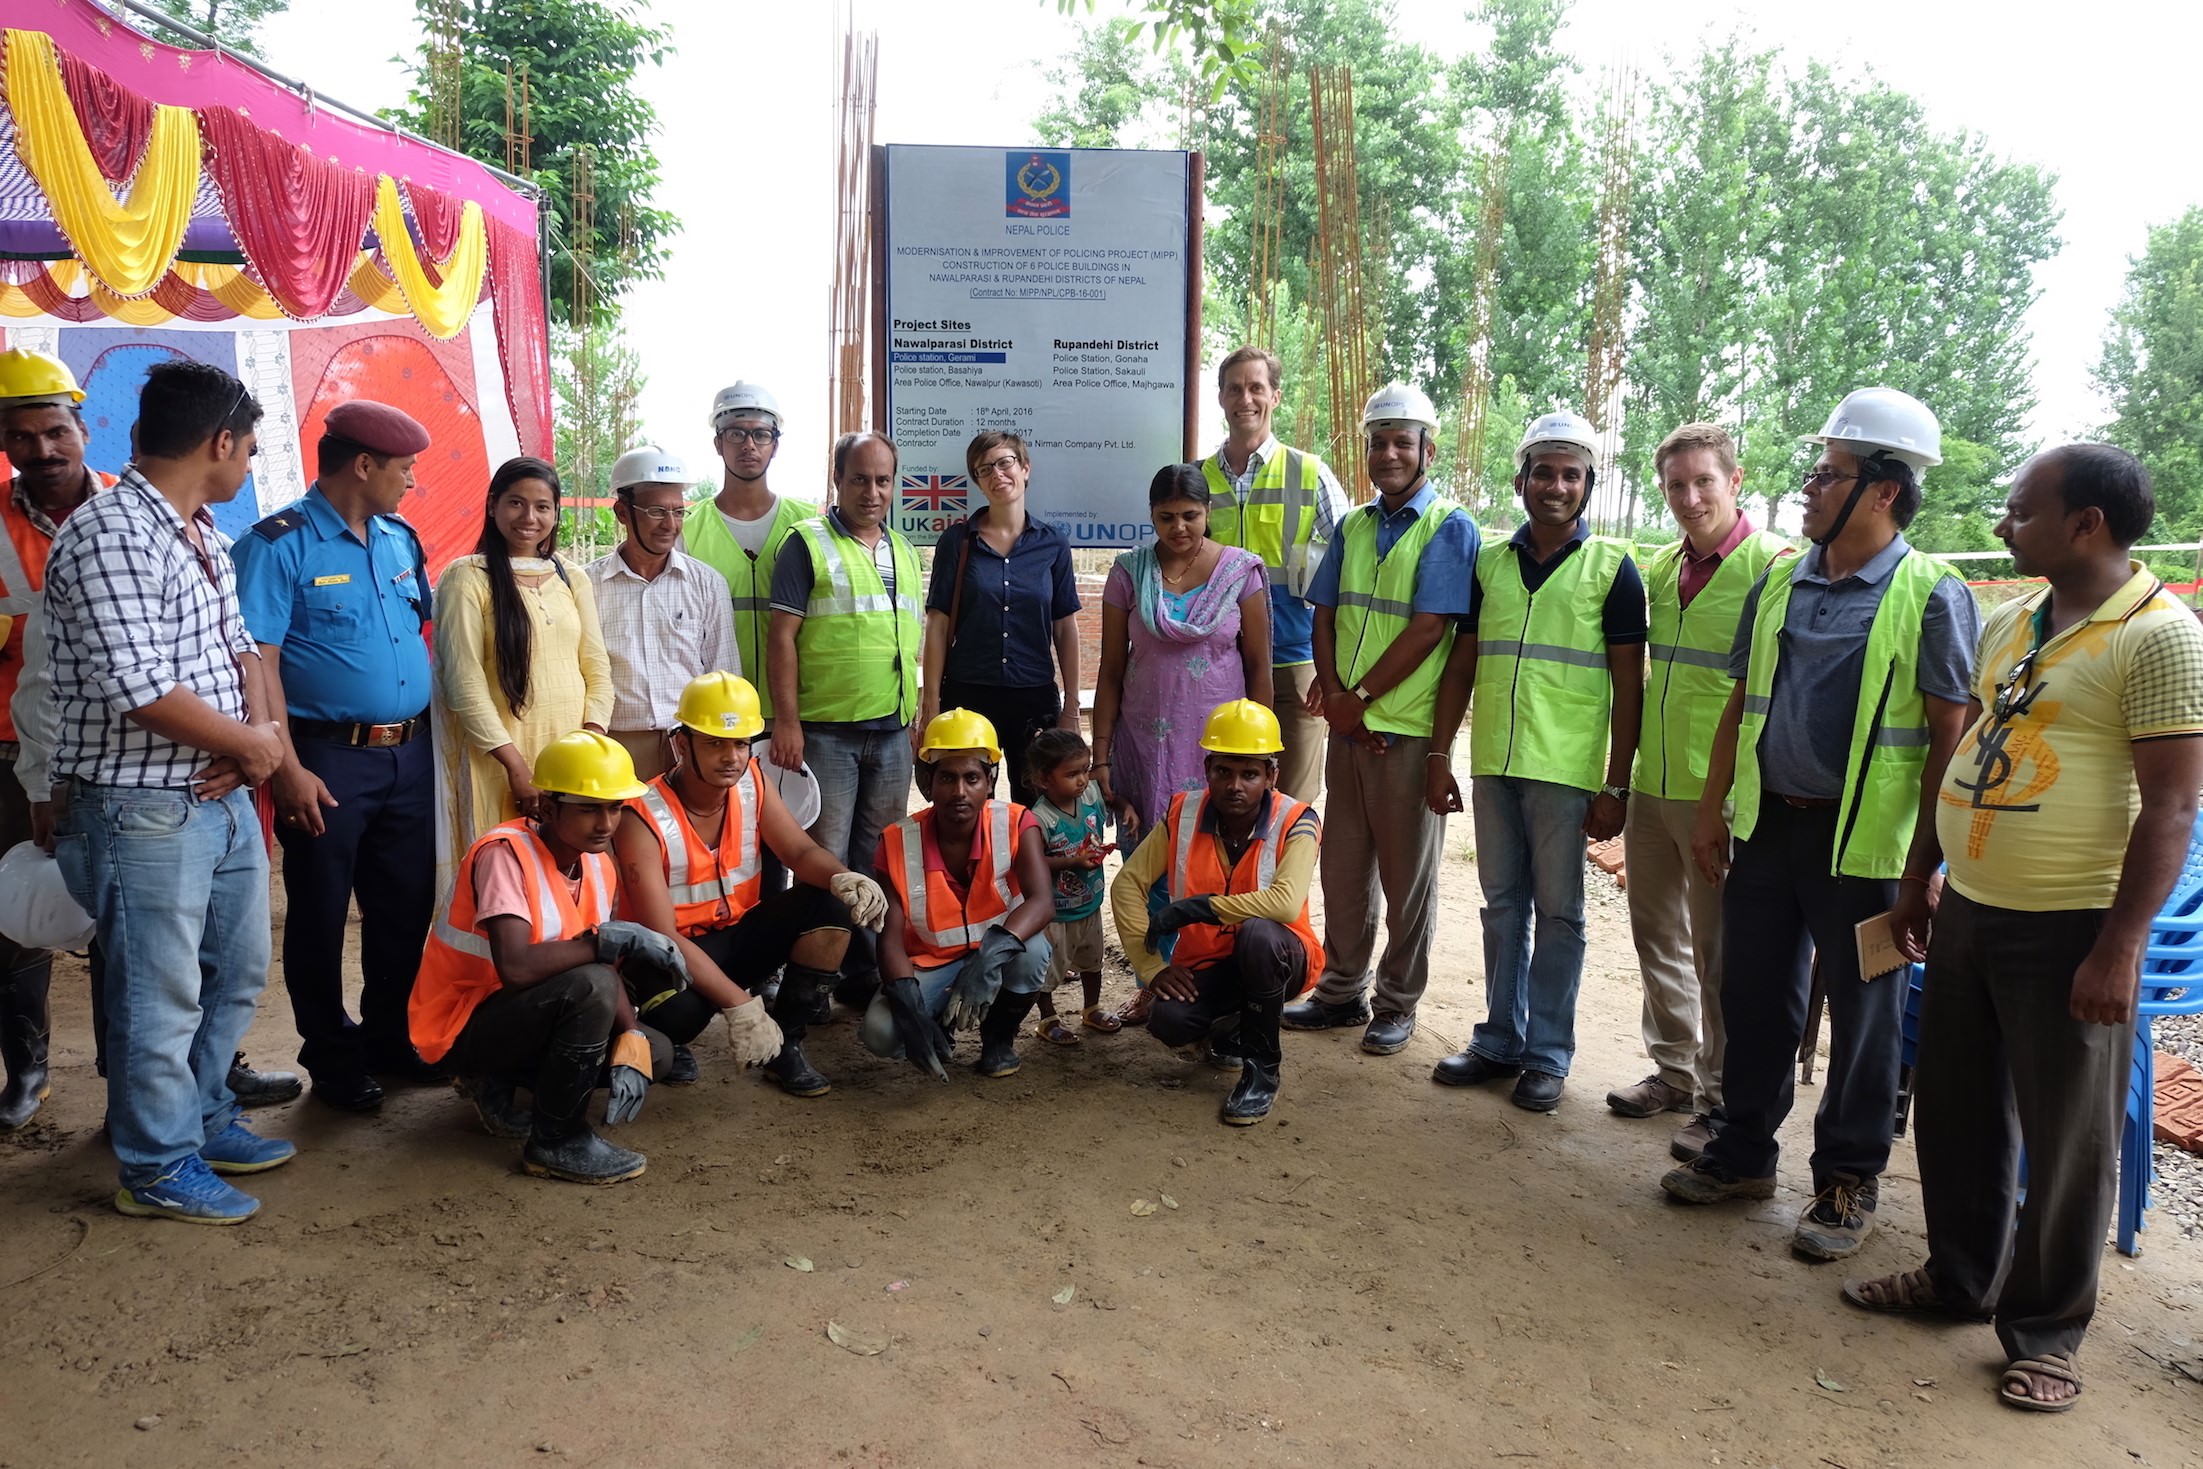 Photos from a field visit in Navilprasi District. People in the photo include community members, contractors, project engineers, project managers, the donor, and me (red shirt third from right).